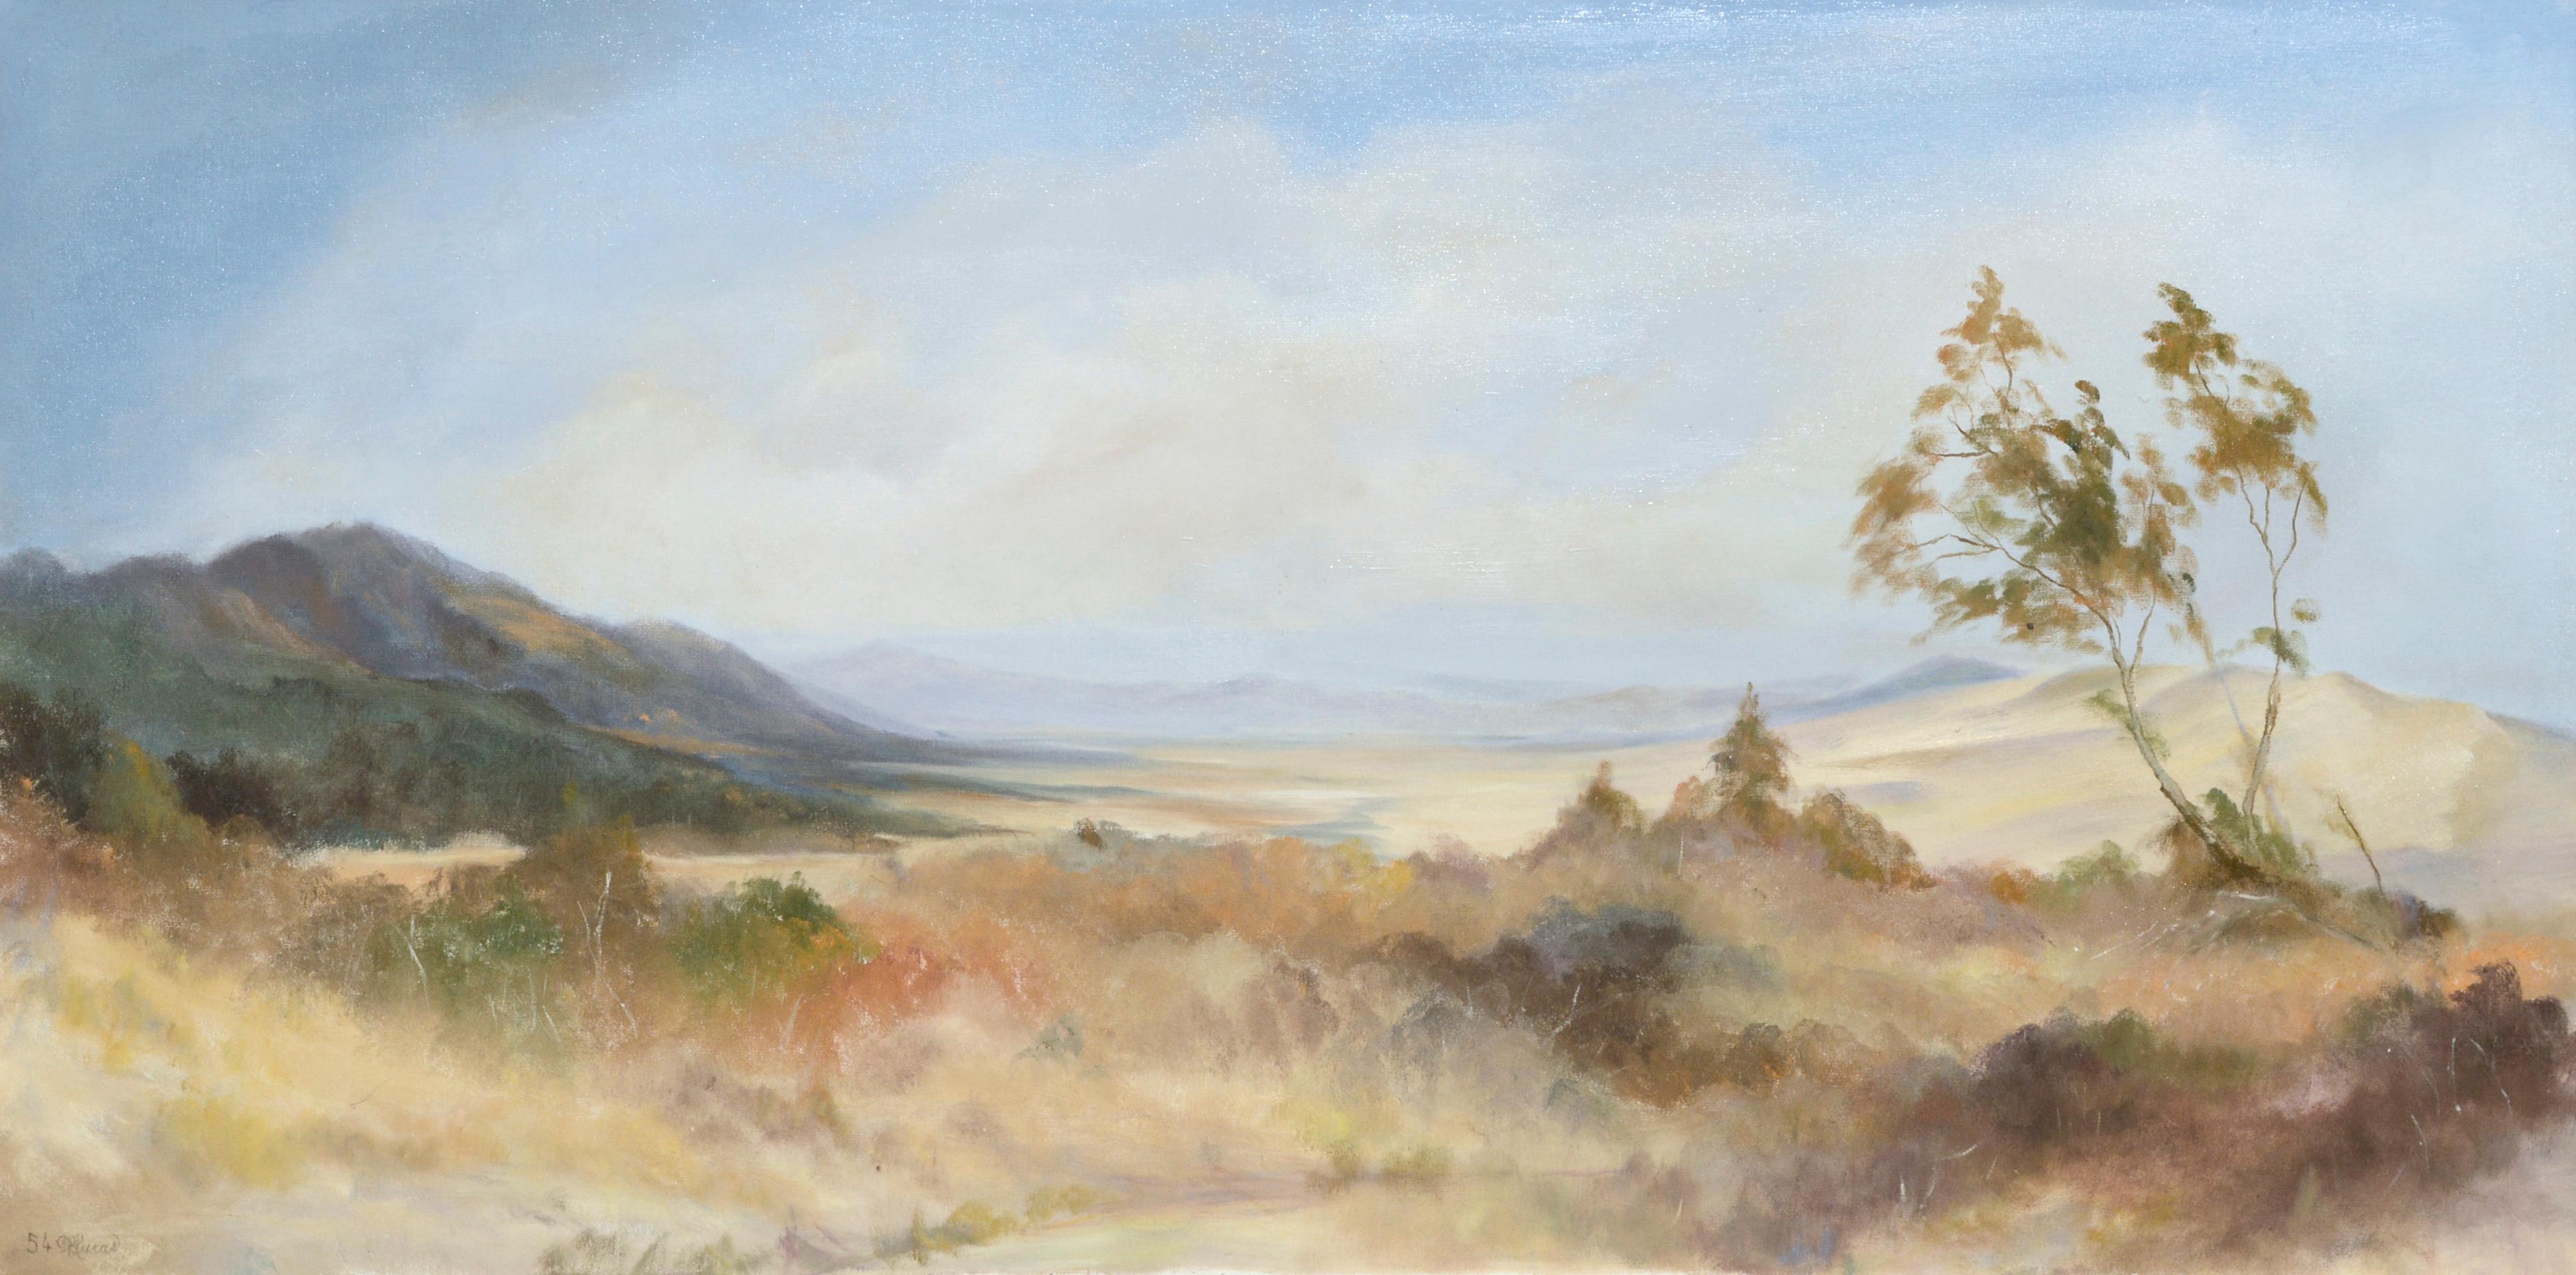 Peaceful Valley - Desert Landscape  - Painting by Kenneth Lucas